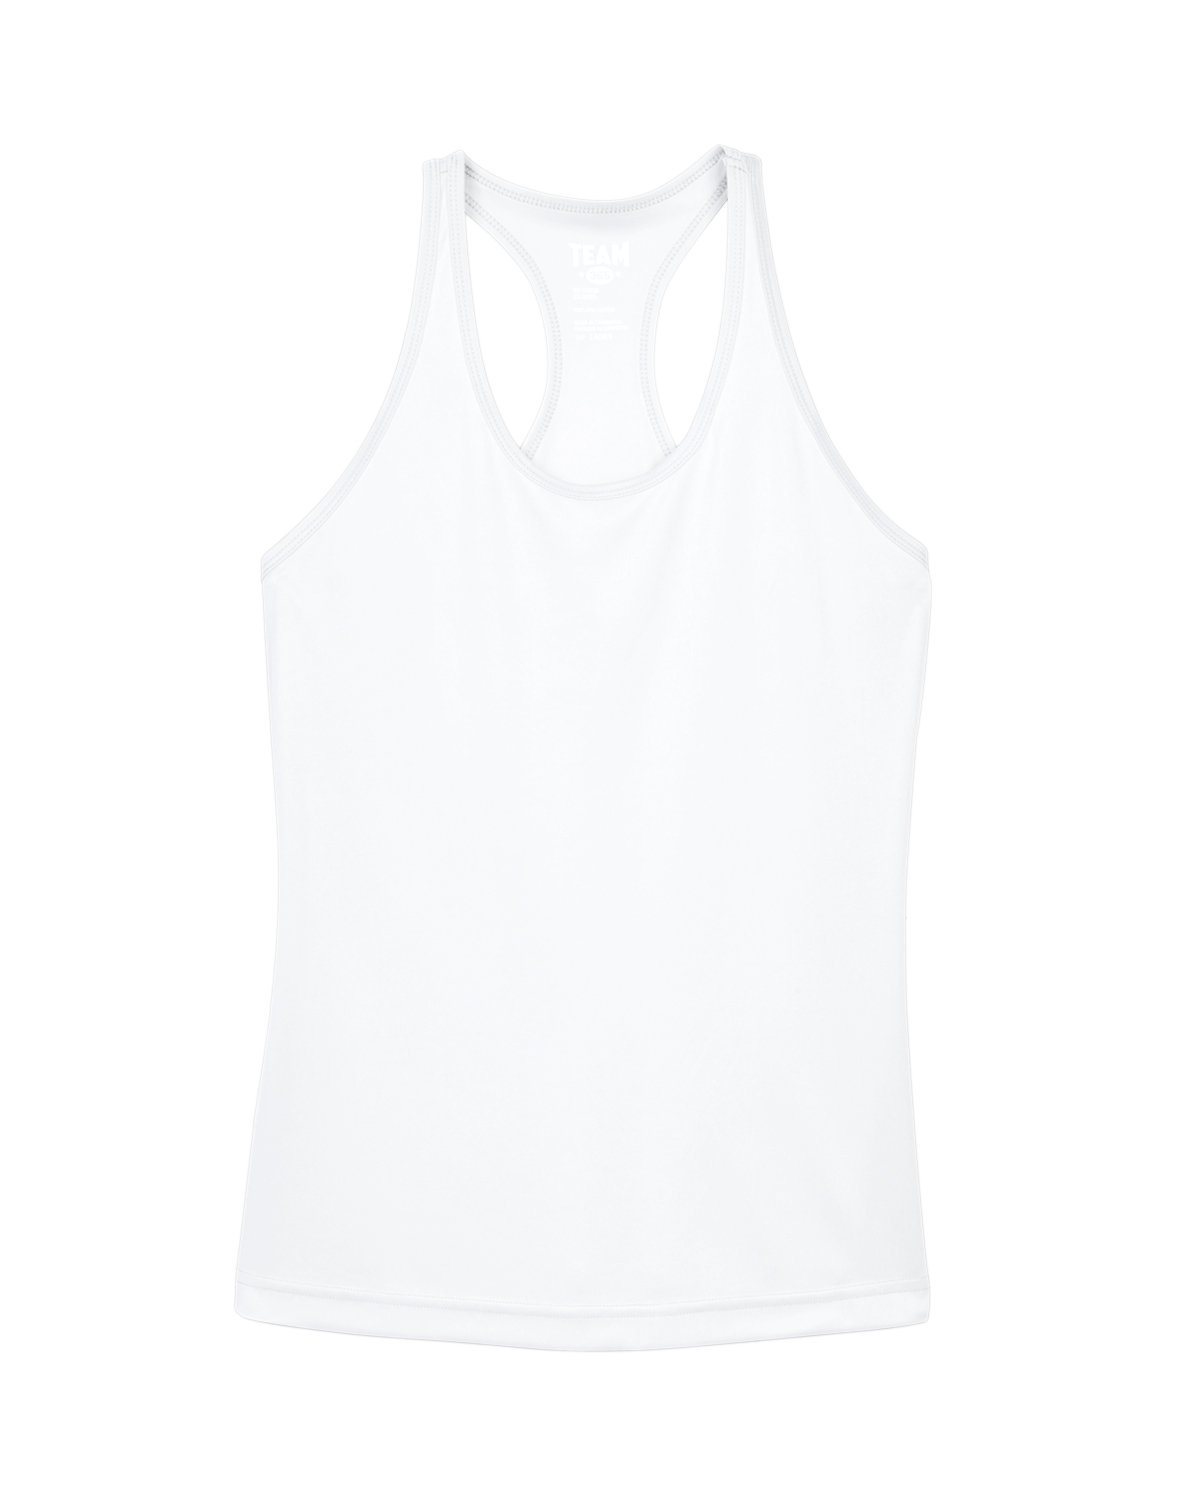 Picture of Team 365 Women's Zone Performance Racerback Tank